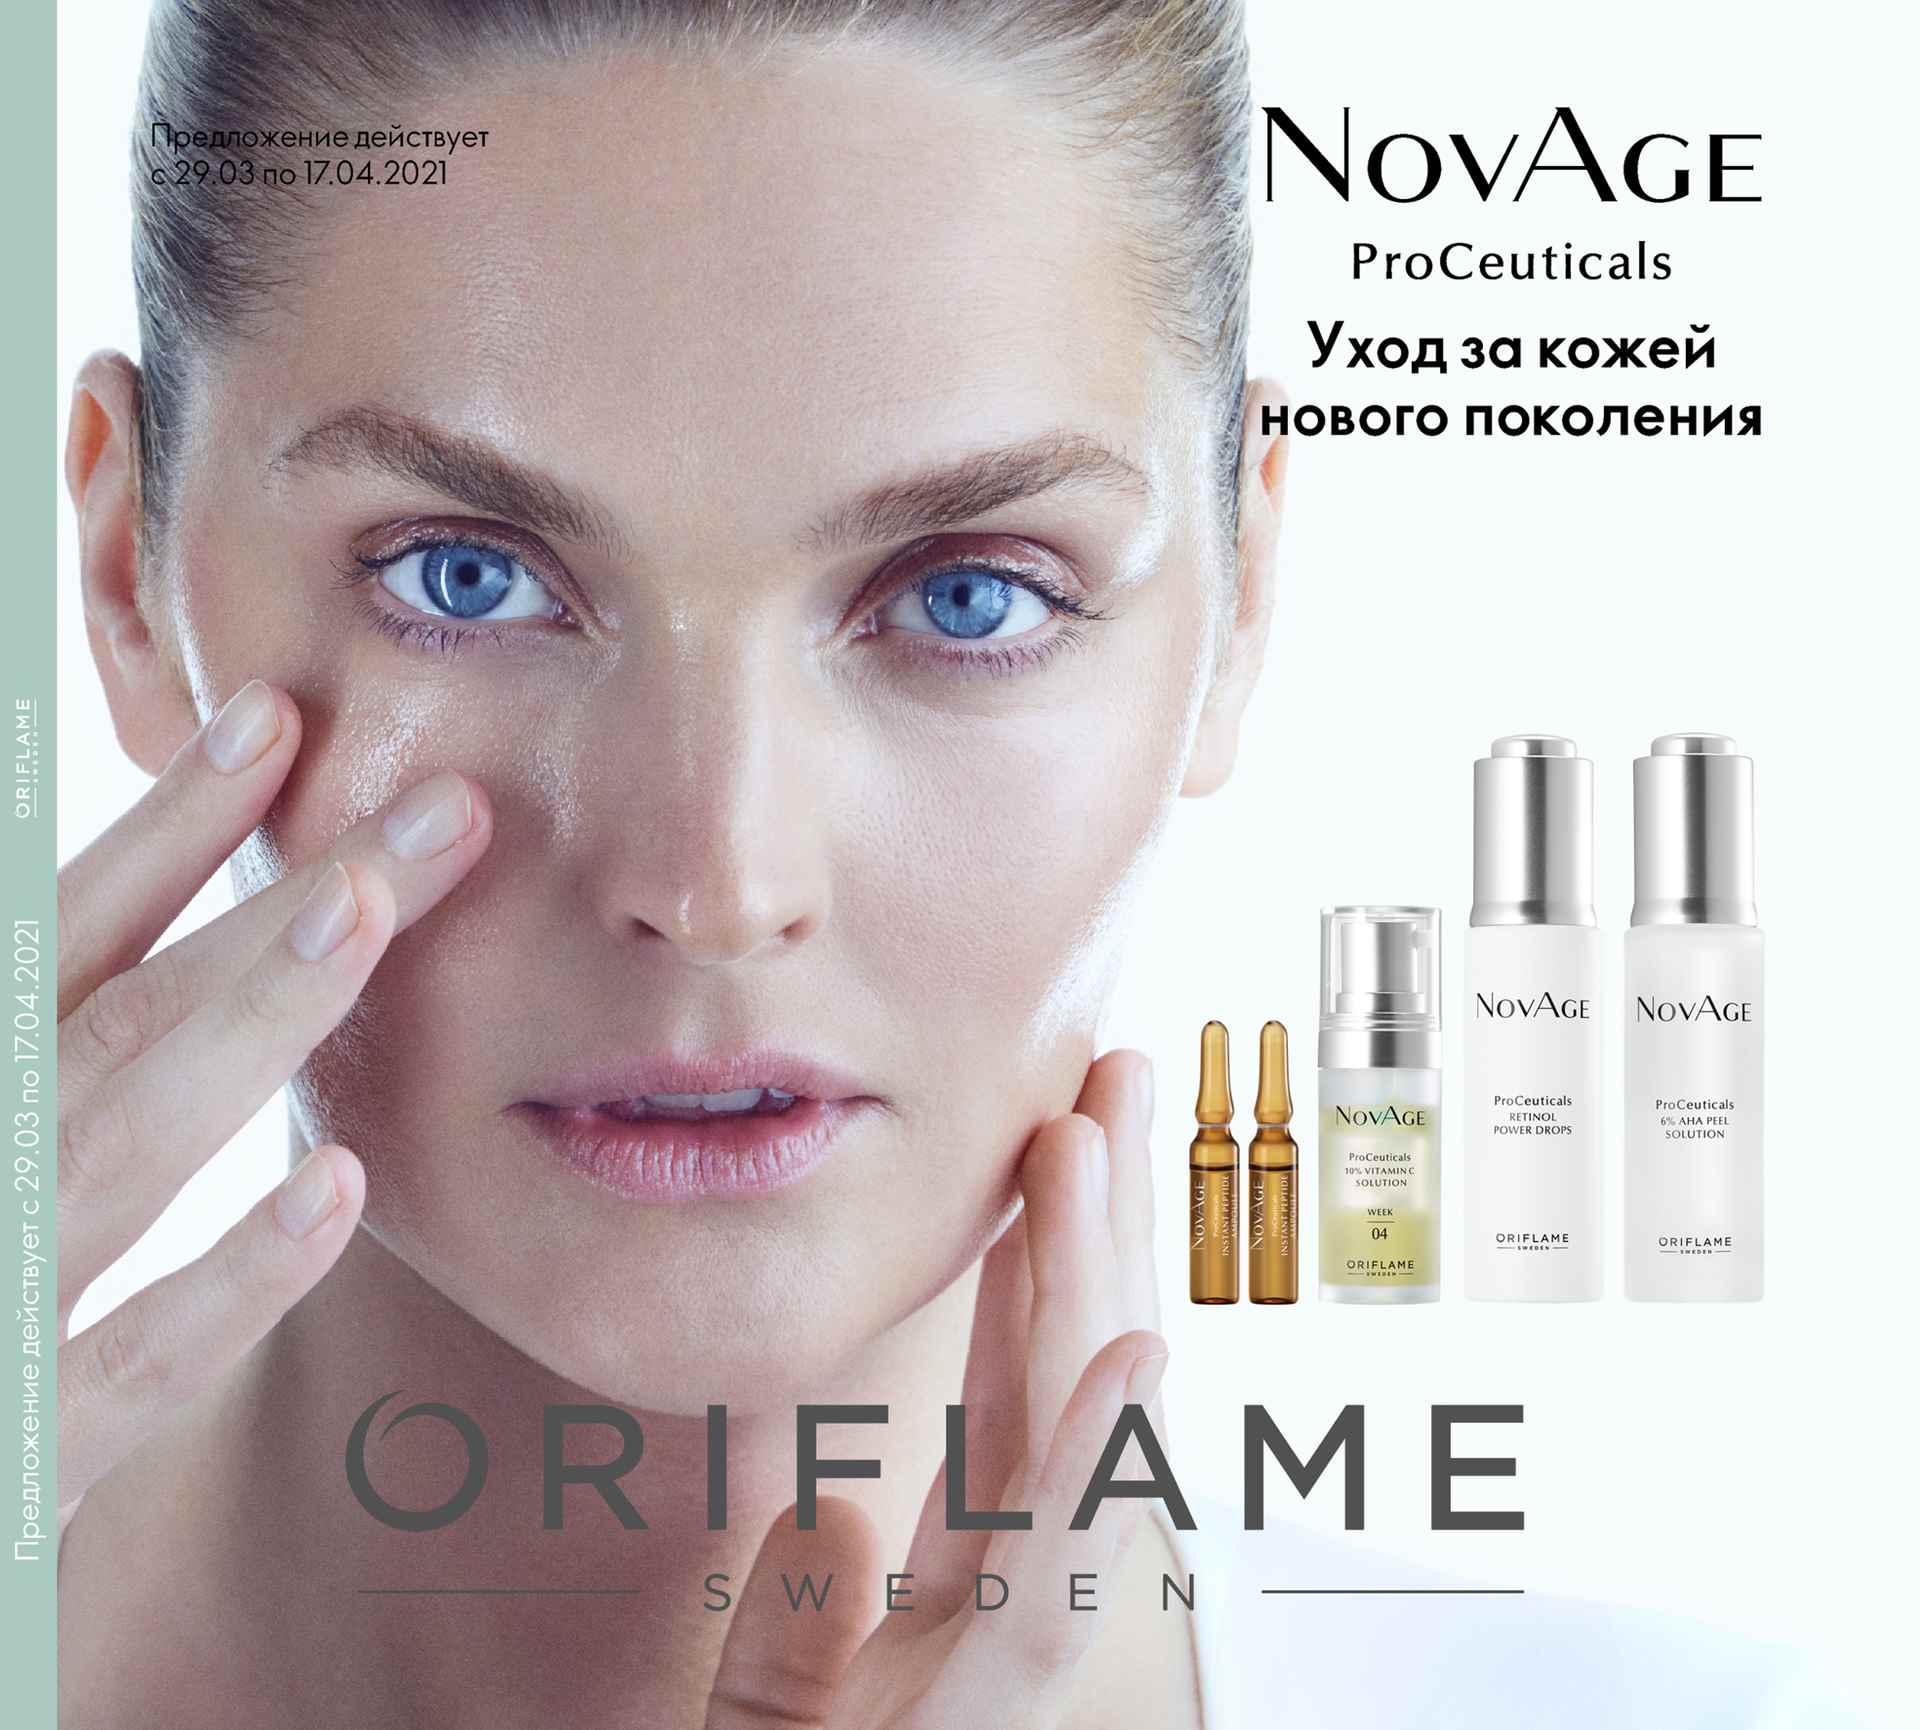    31.03.-  Oriflame!   The One 194  450, /,  86  340, 28, / 57,-   158  .    .! 13%.